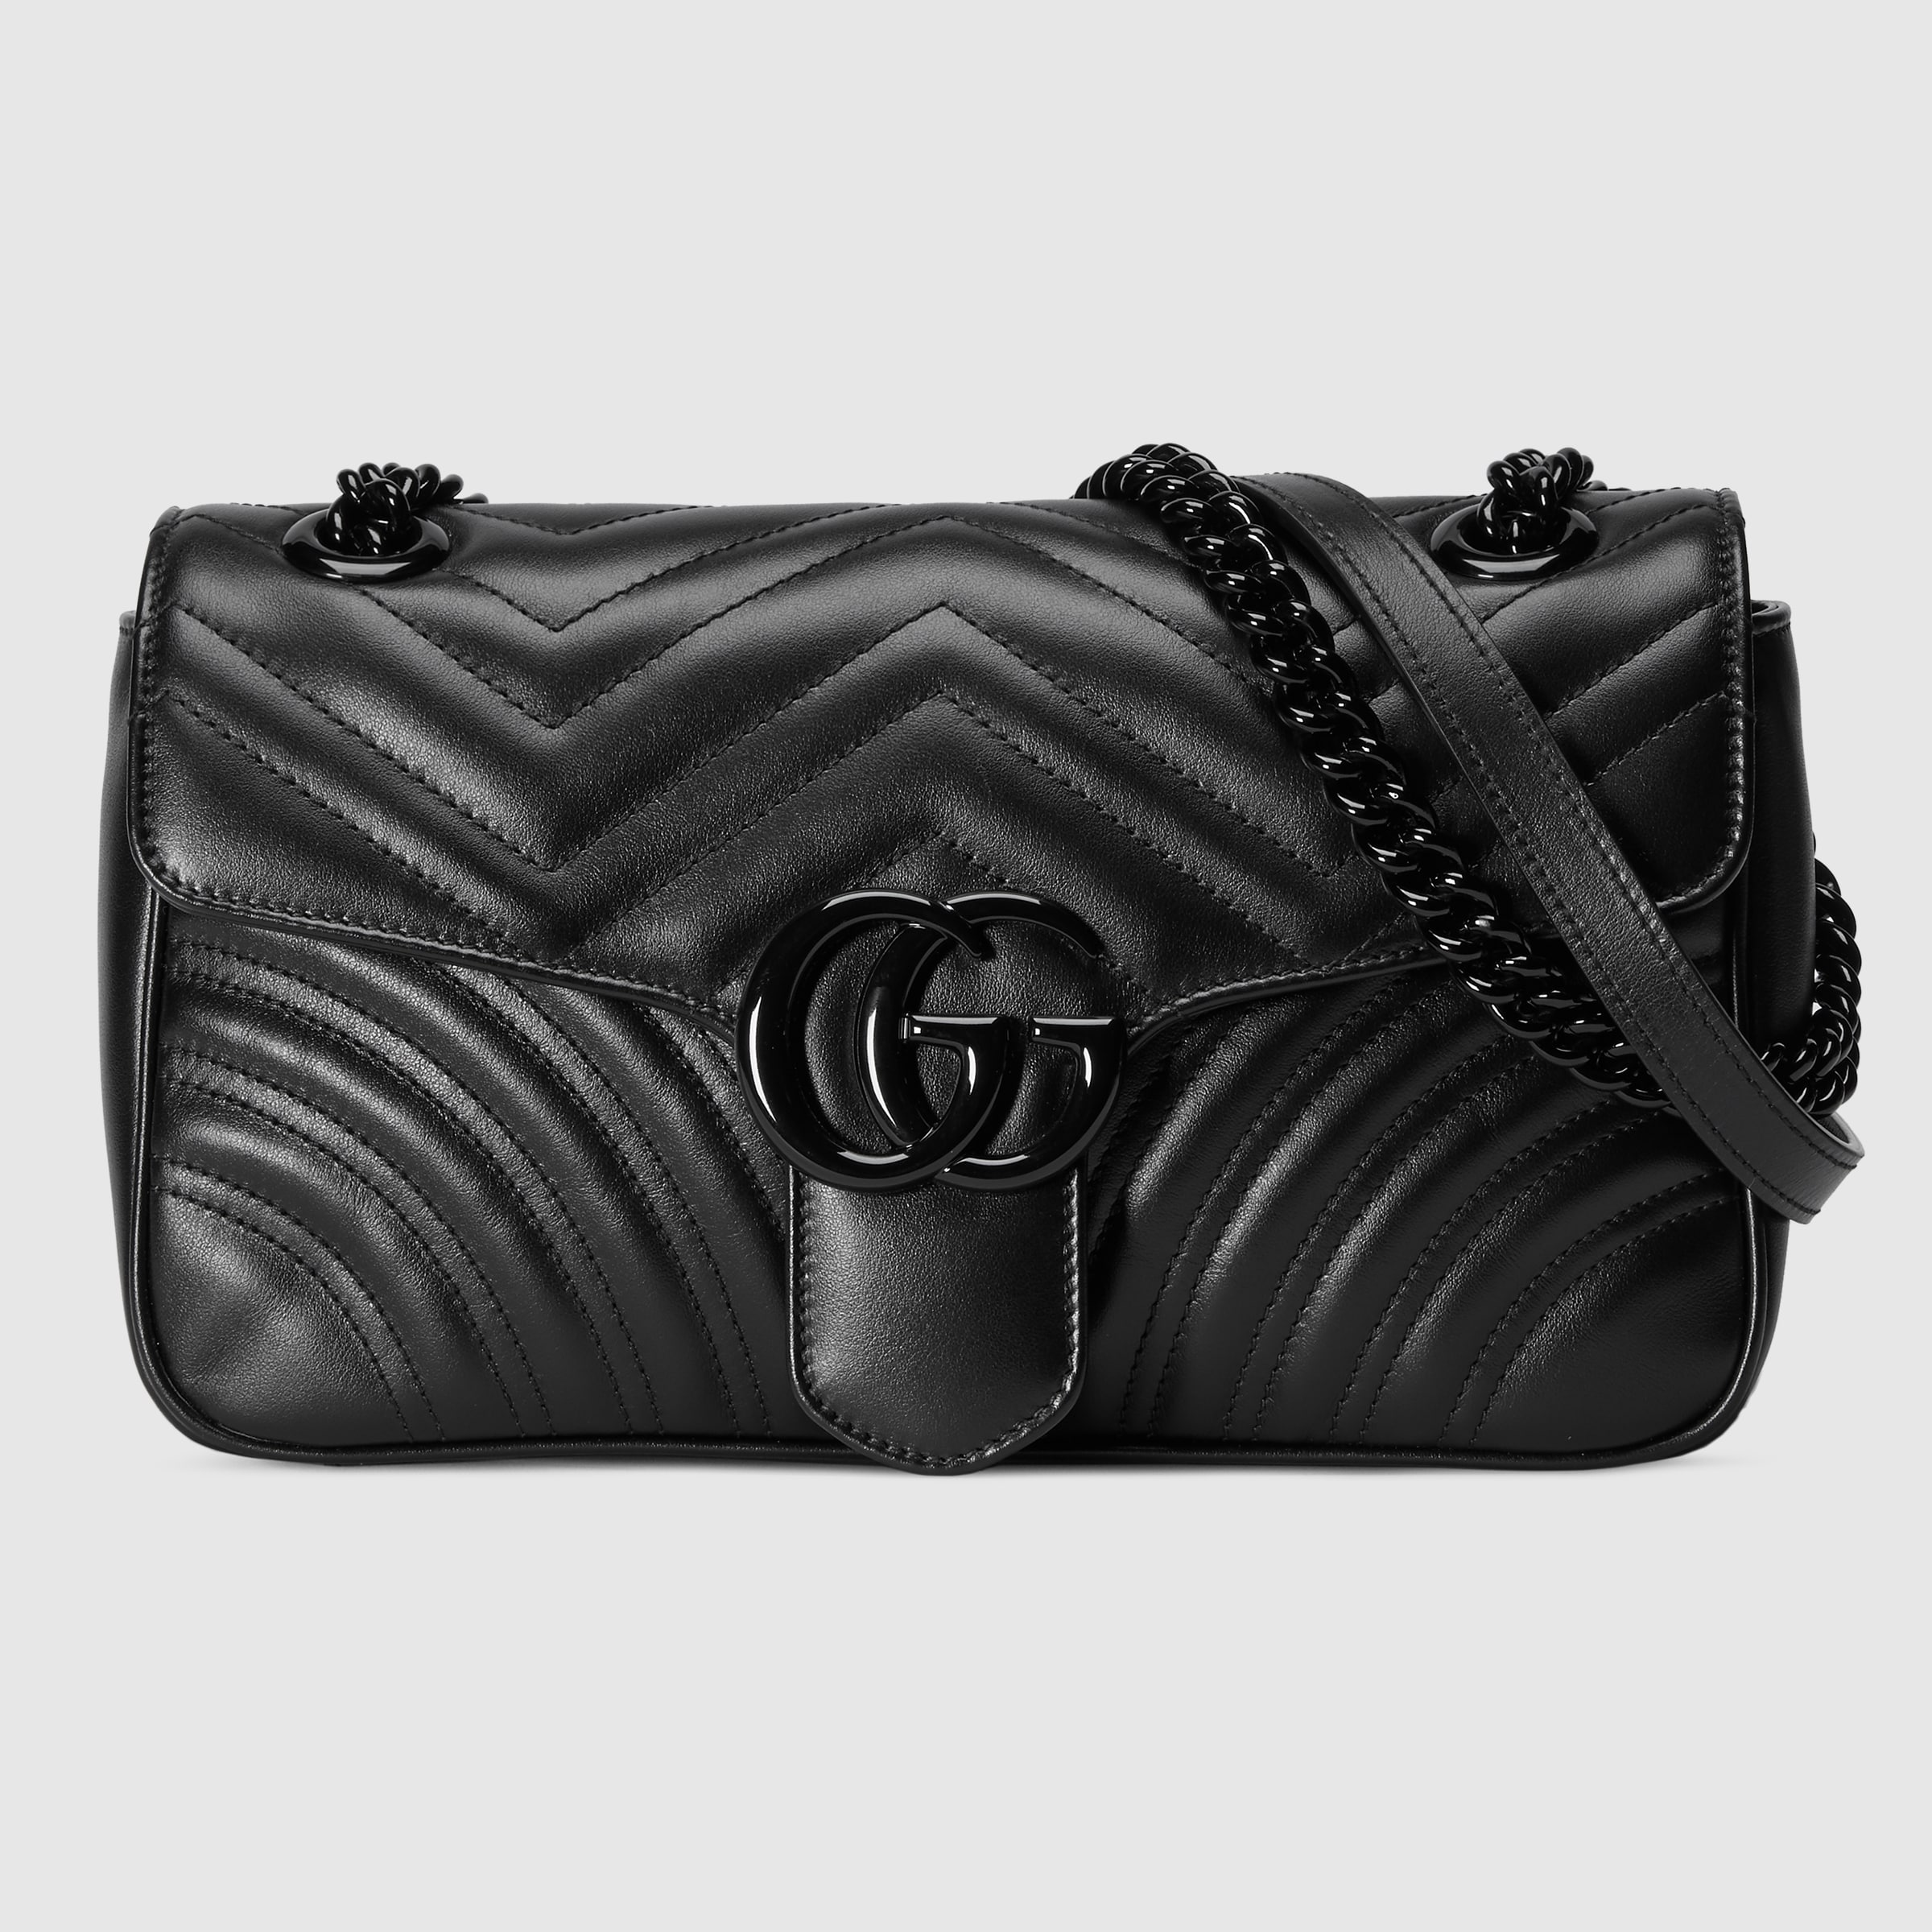 Gucci gg marmont small shoulder bag